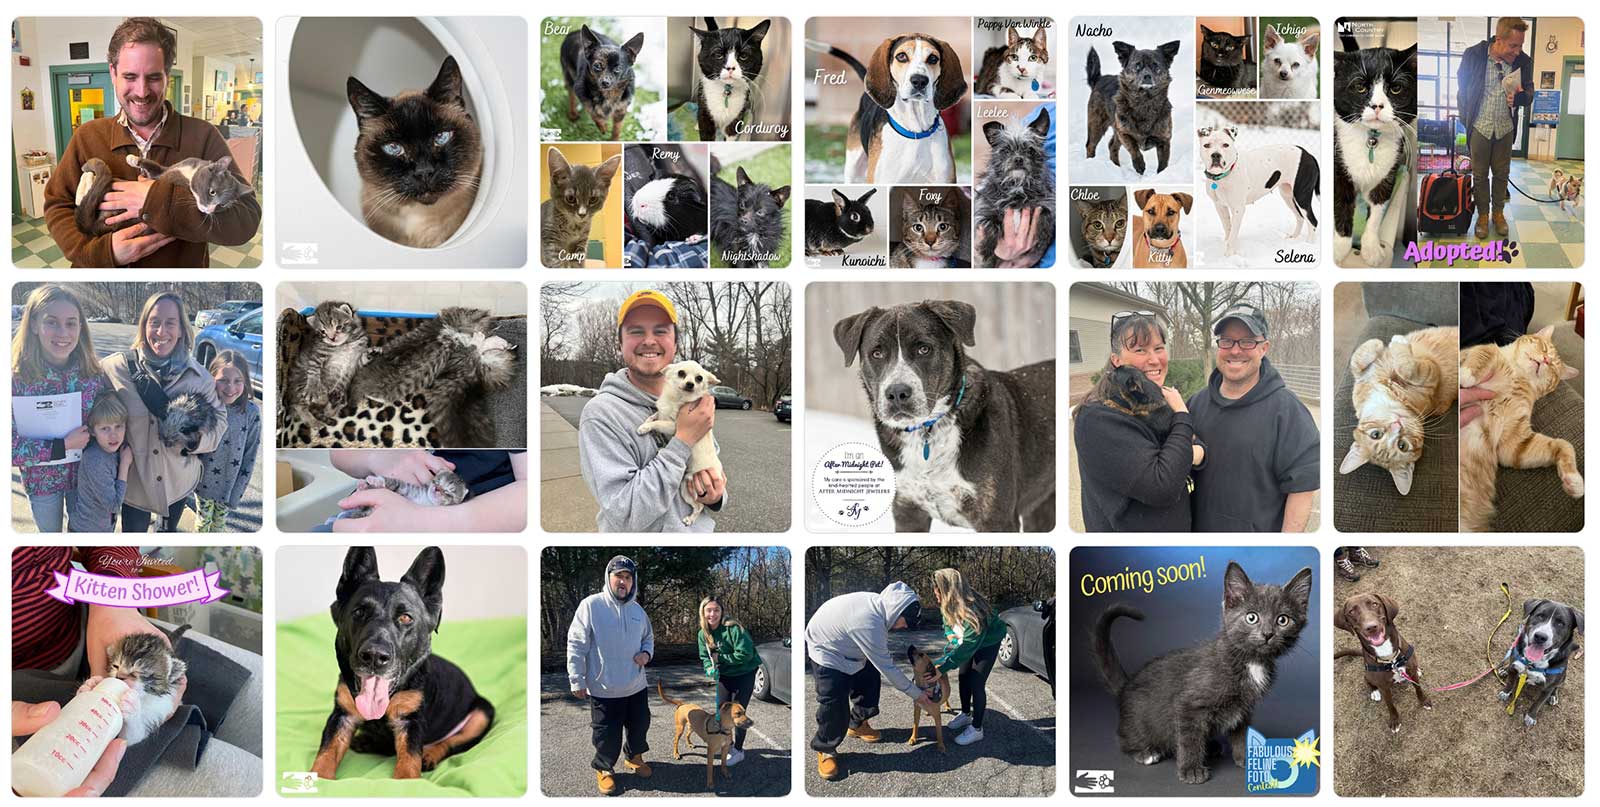 photos from the Humane Society of Chittenden County's Facebook page of dogs and cats and adopters